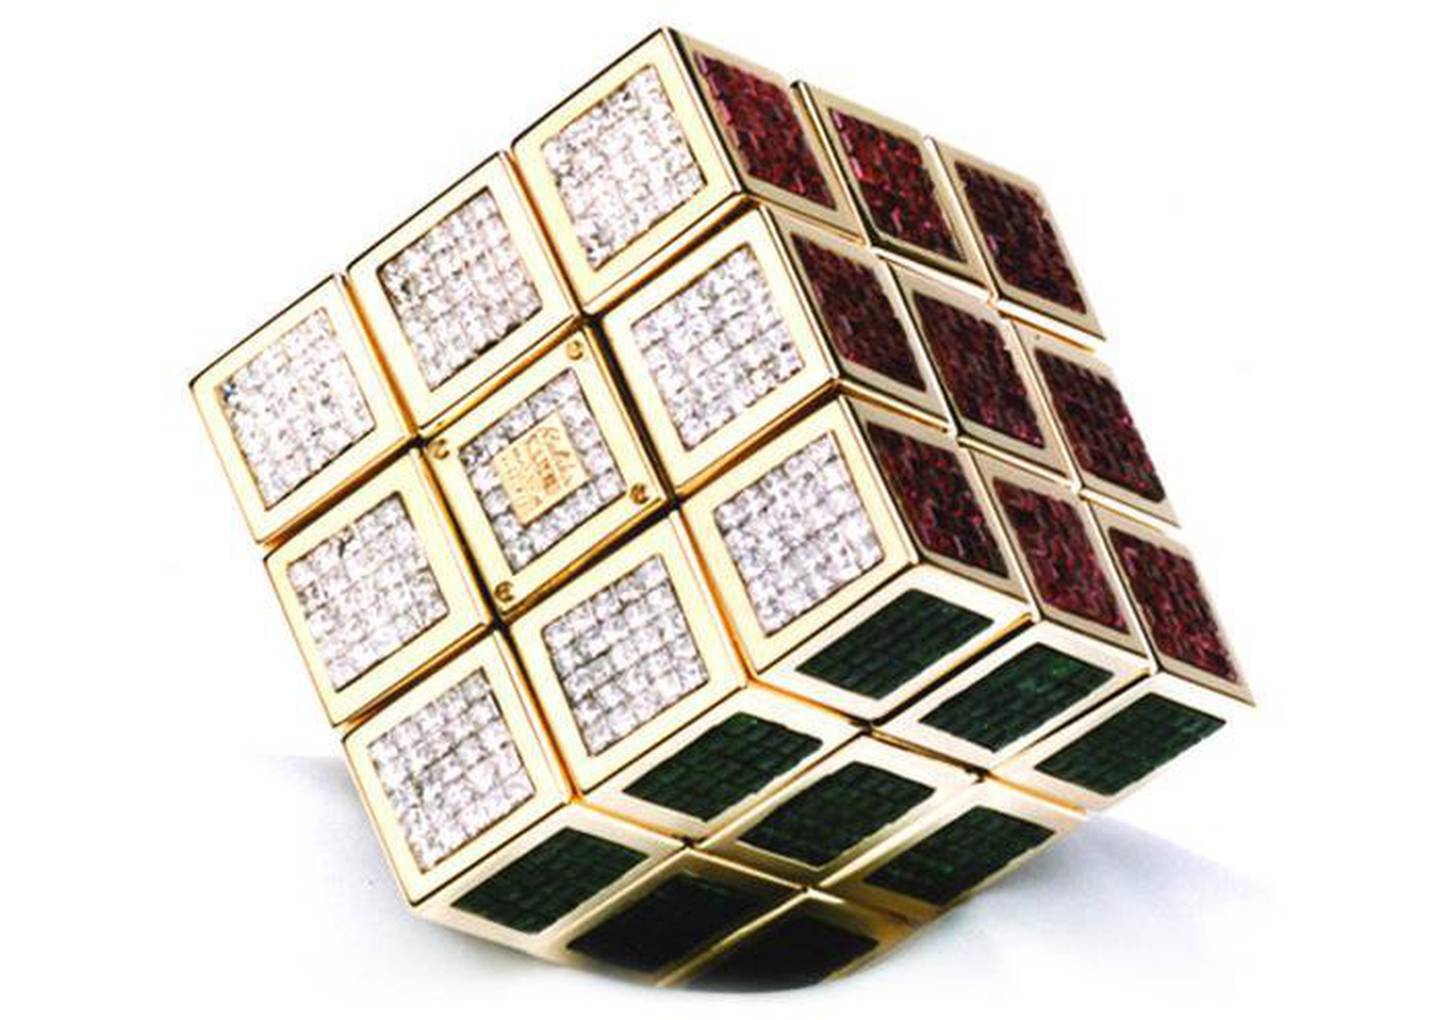 A jewel-encrusted Rubik's cube is currently available on the website for Dh9.5m. Courtesy Hushush.com